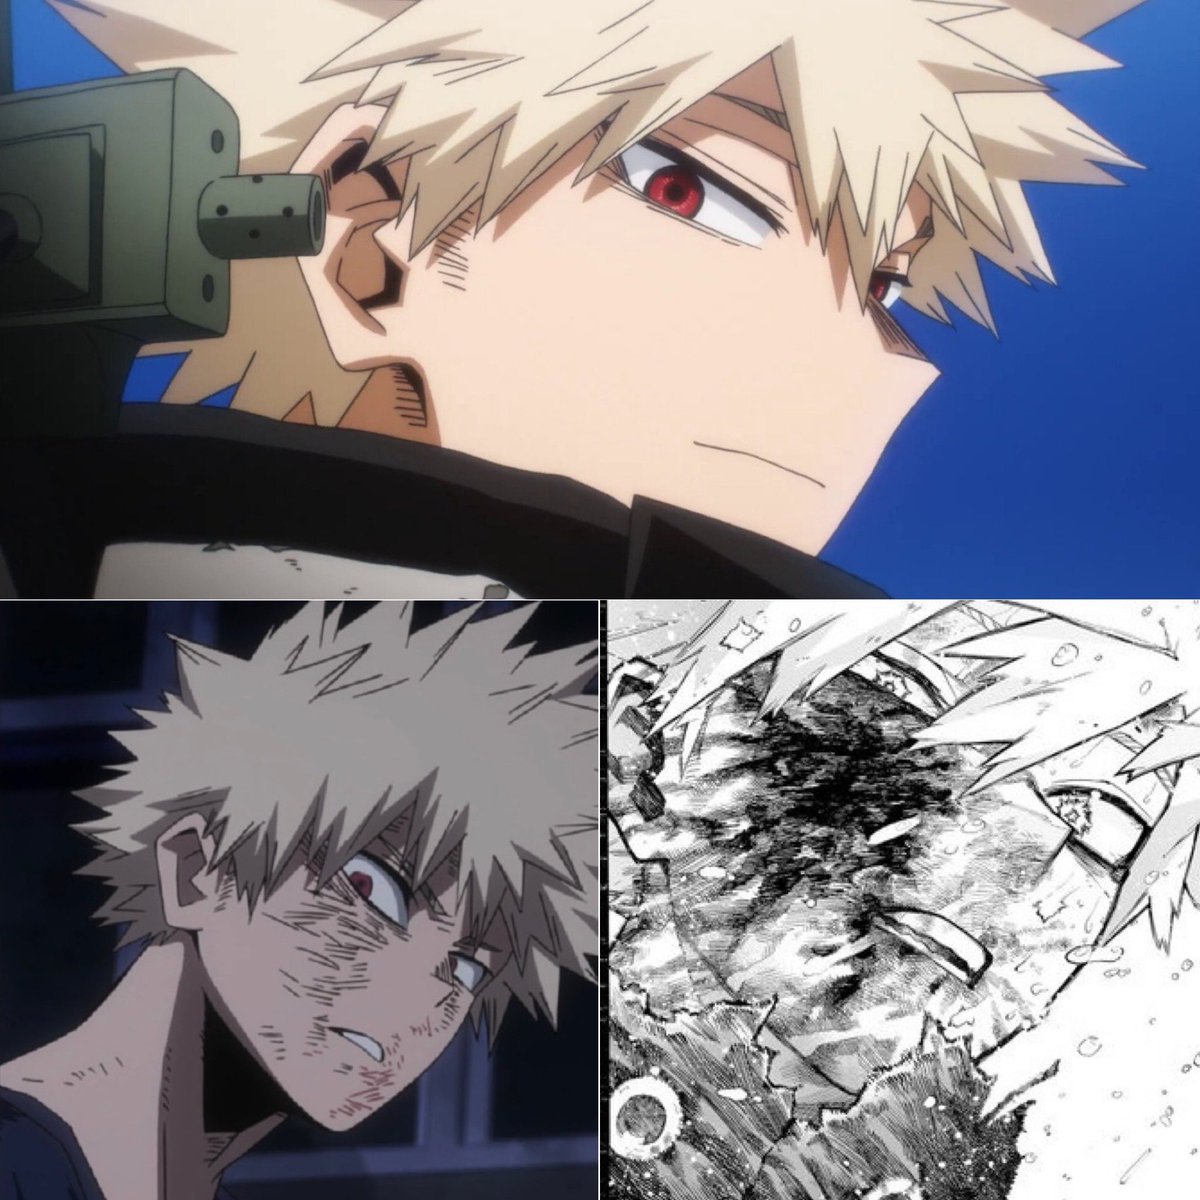 Kacchan looking over his shoulder during the big realizations